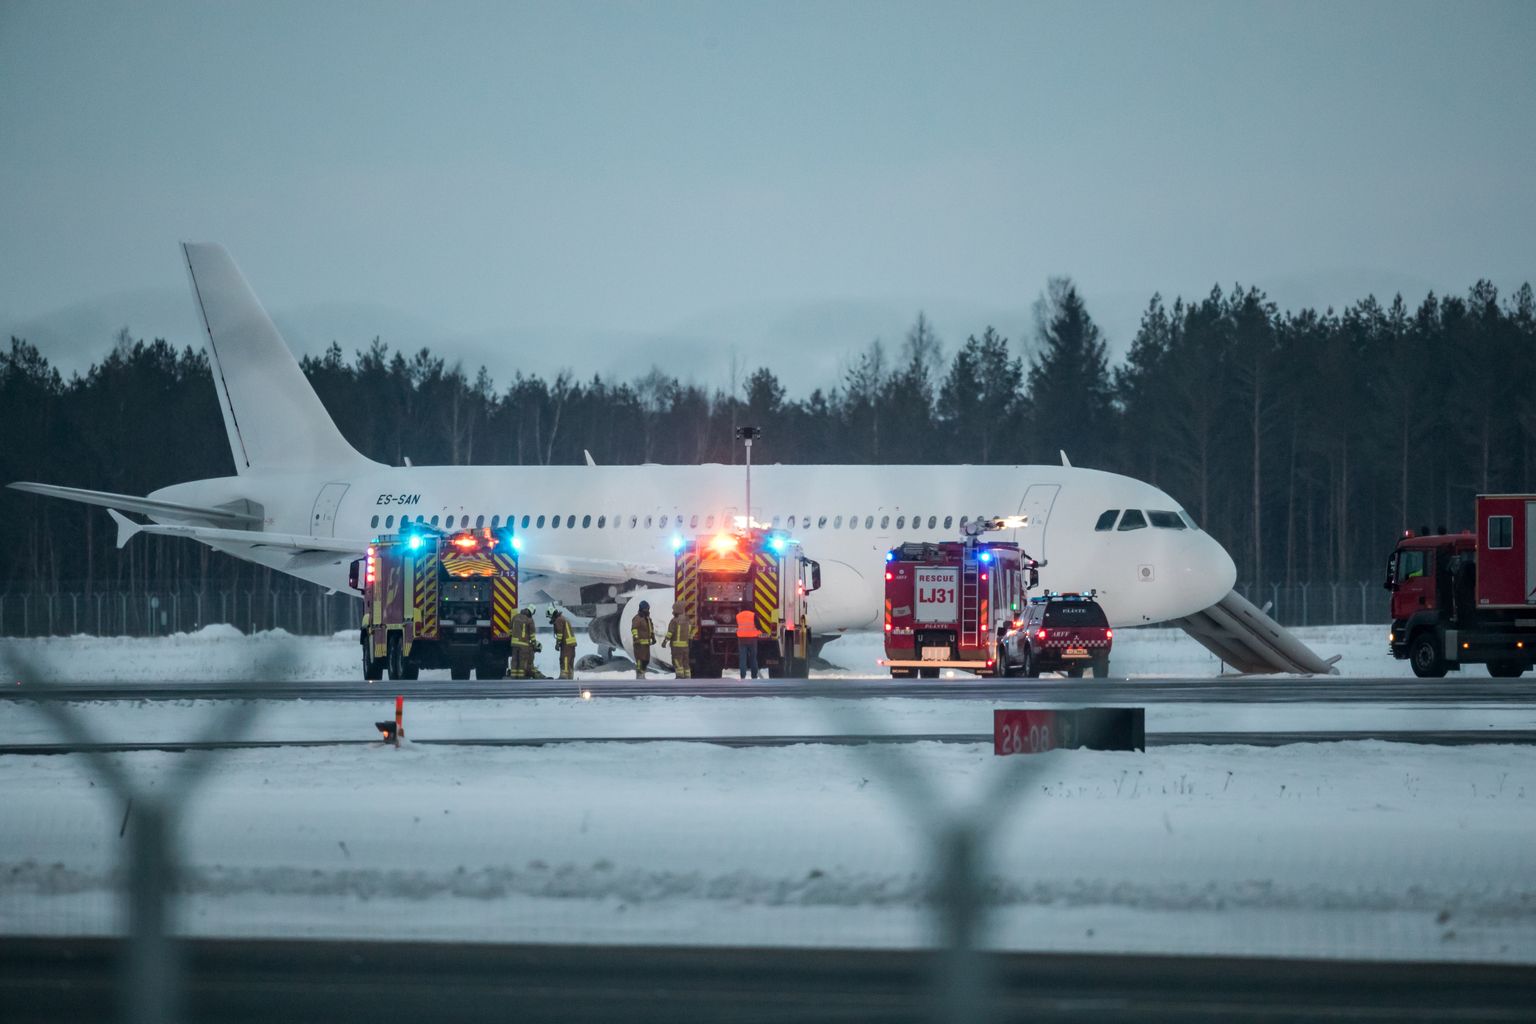 An Airbus A320 airliner of the Smartlynx airline made emergency landing in Tallinn Airport last February. 